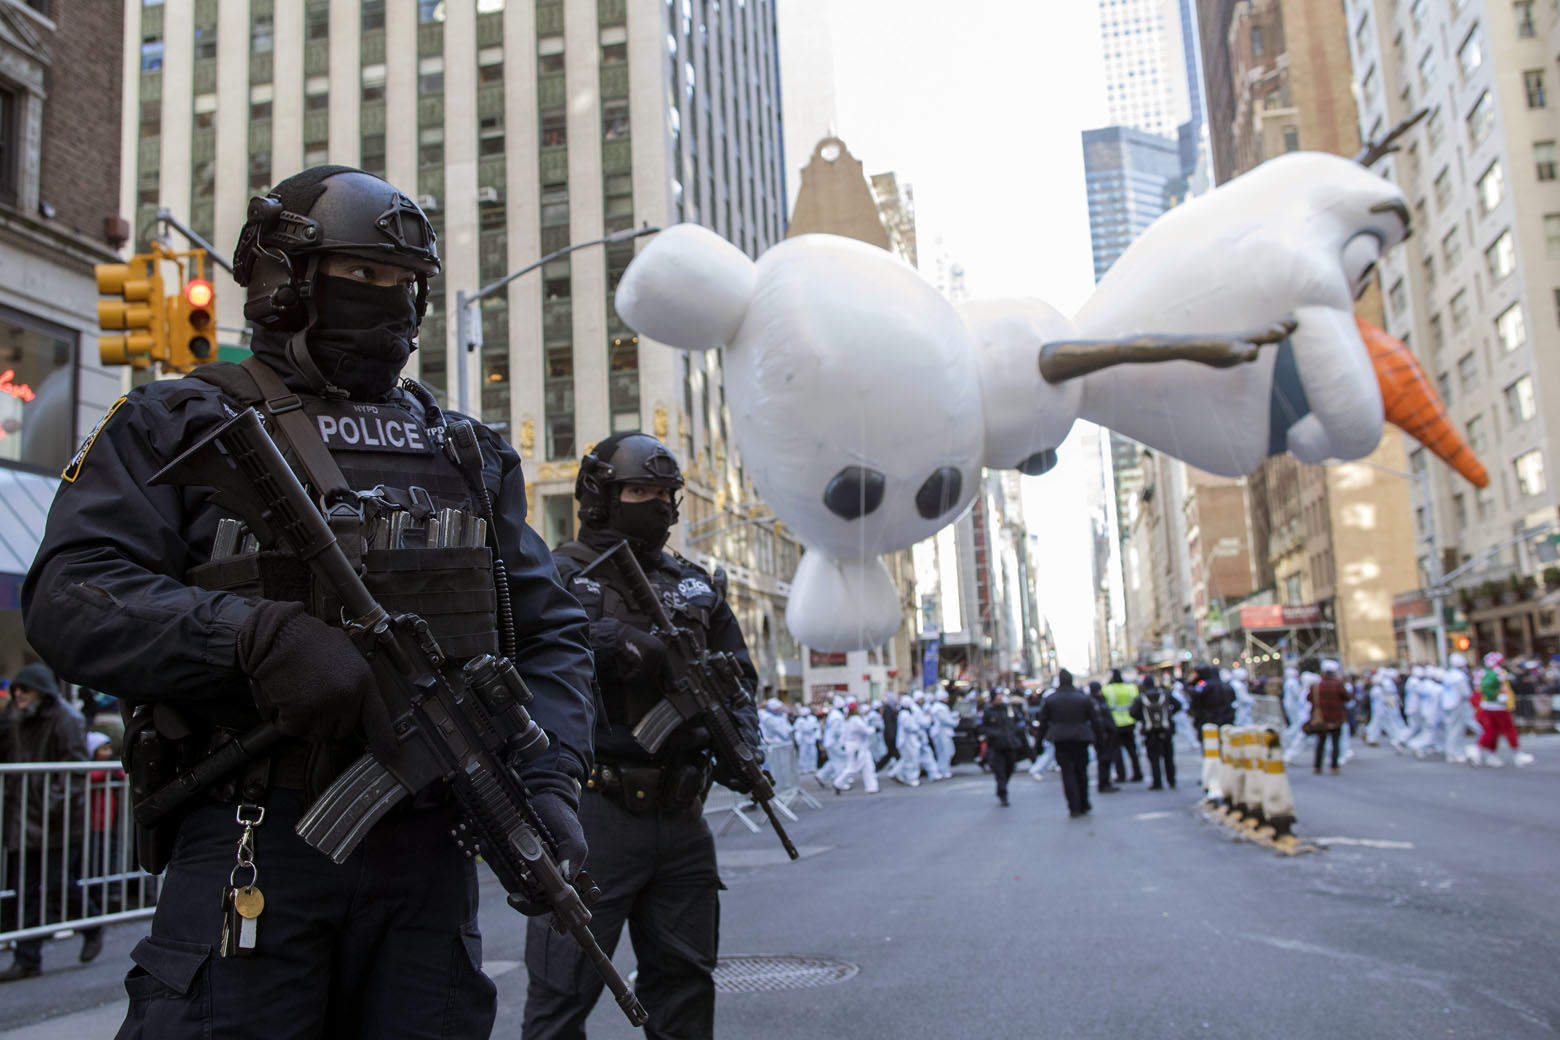 Heavily-armed police officers stand guard as the Olaf balloon floats down 6th Avenue during the 92nd annual Macy's Thanksgiving Day Parade, Thursday, Nov. 22, 2018, in New York. (AP Photo/Mary Altaffer)